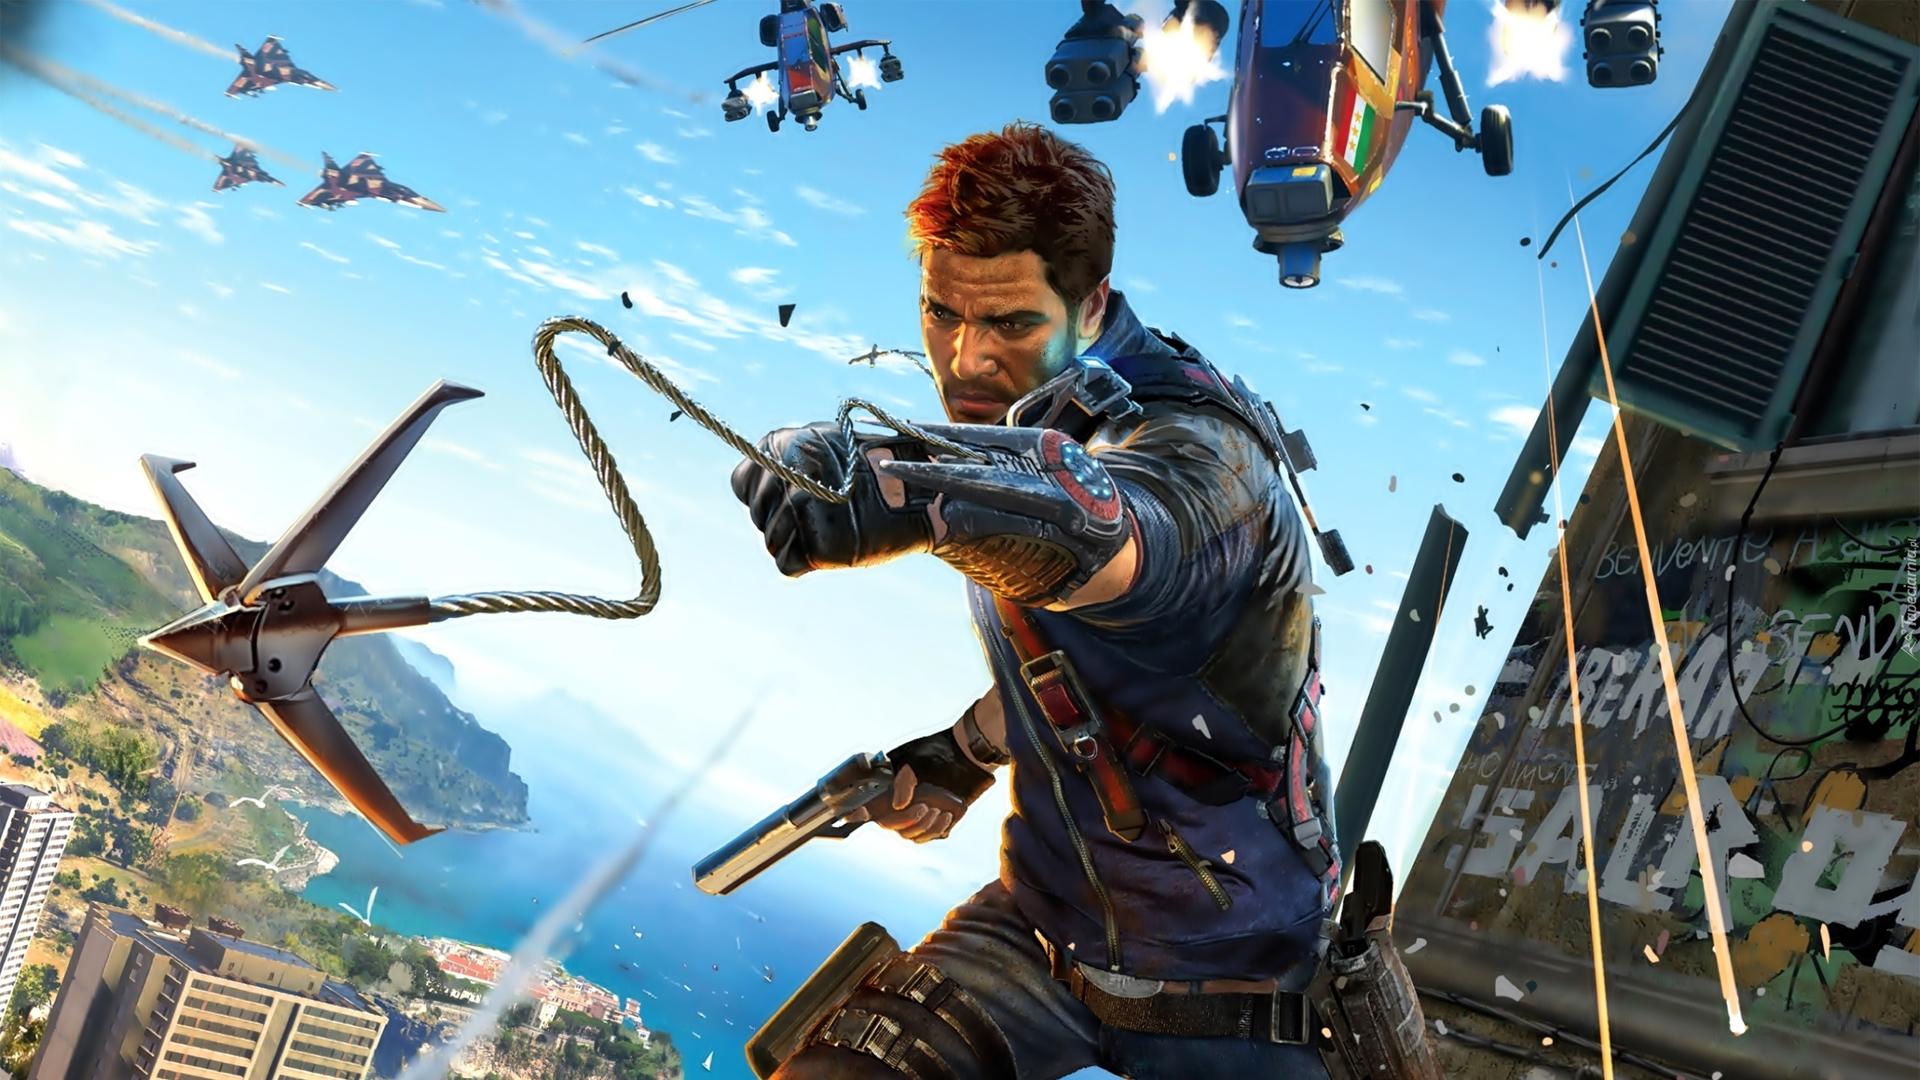 Rico Rodriguez firing the cable cable Wallpaper from Just Cause 3